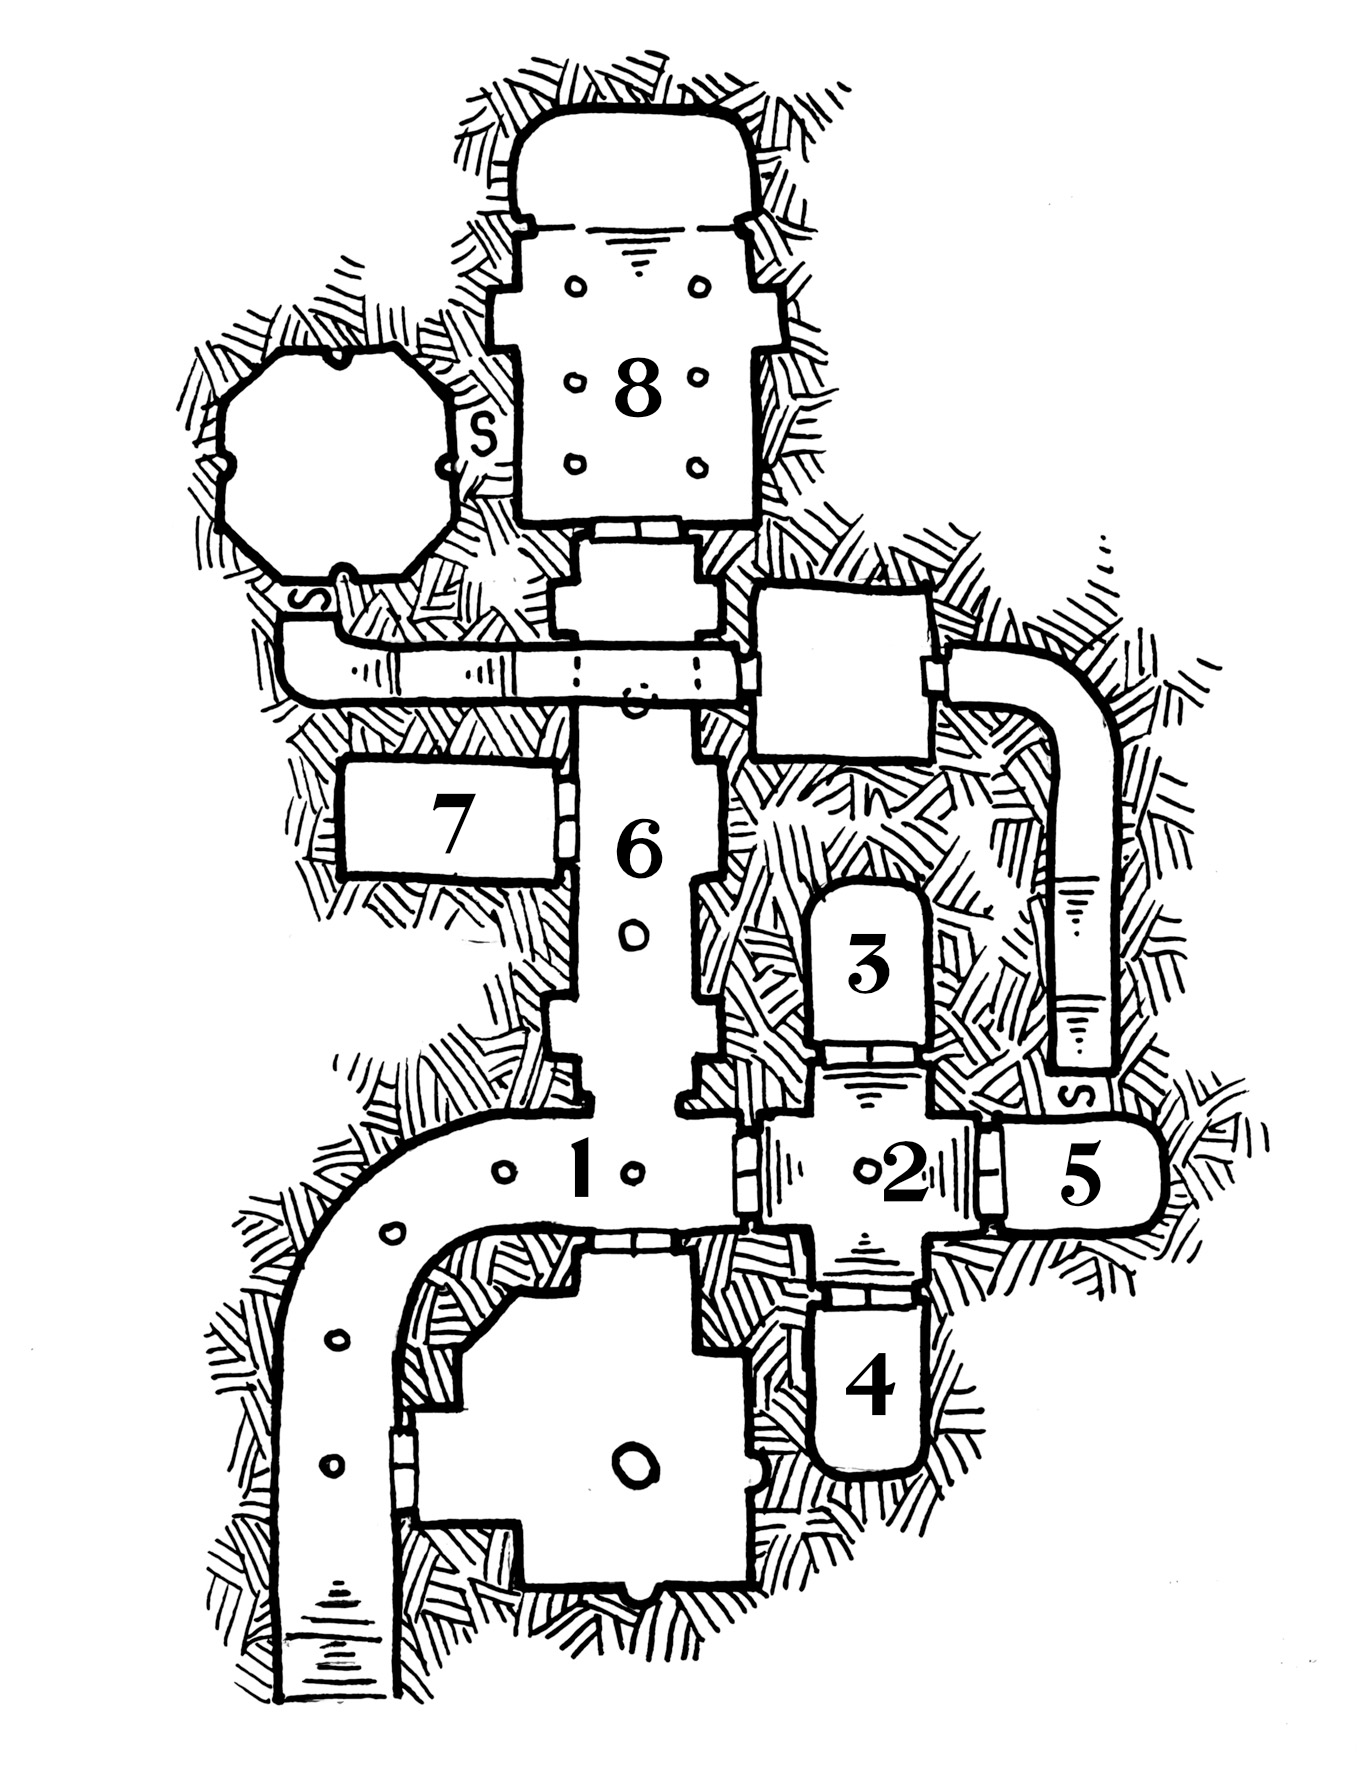 Crypt of the Scarlet Wolf